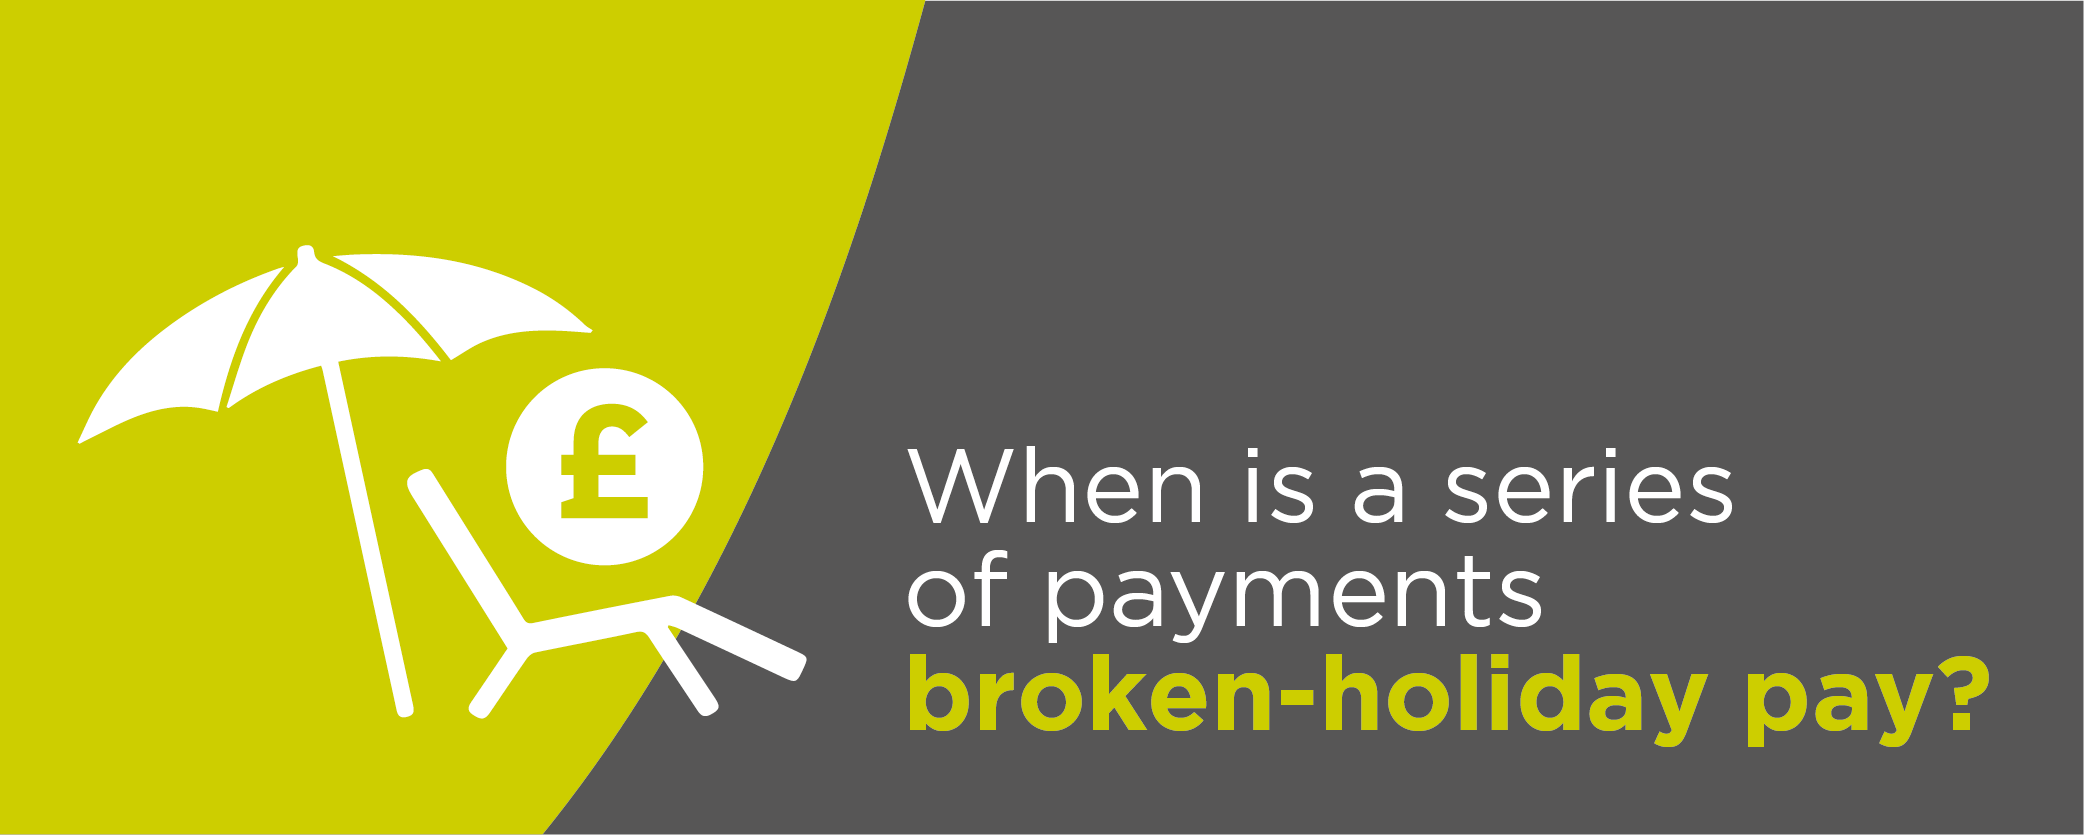 When is a series of payments broken-holiday pay?